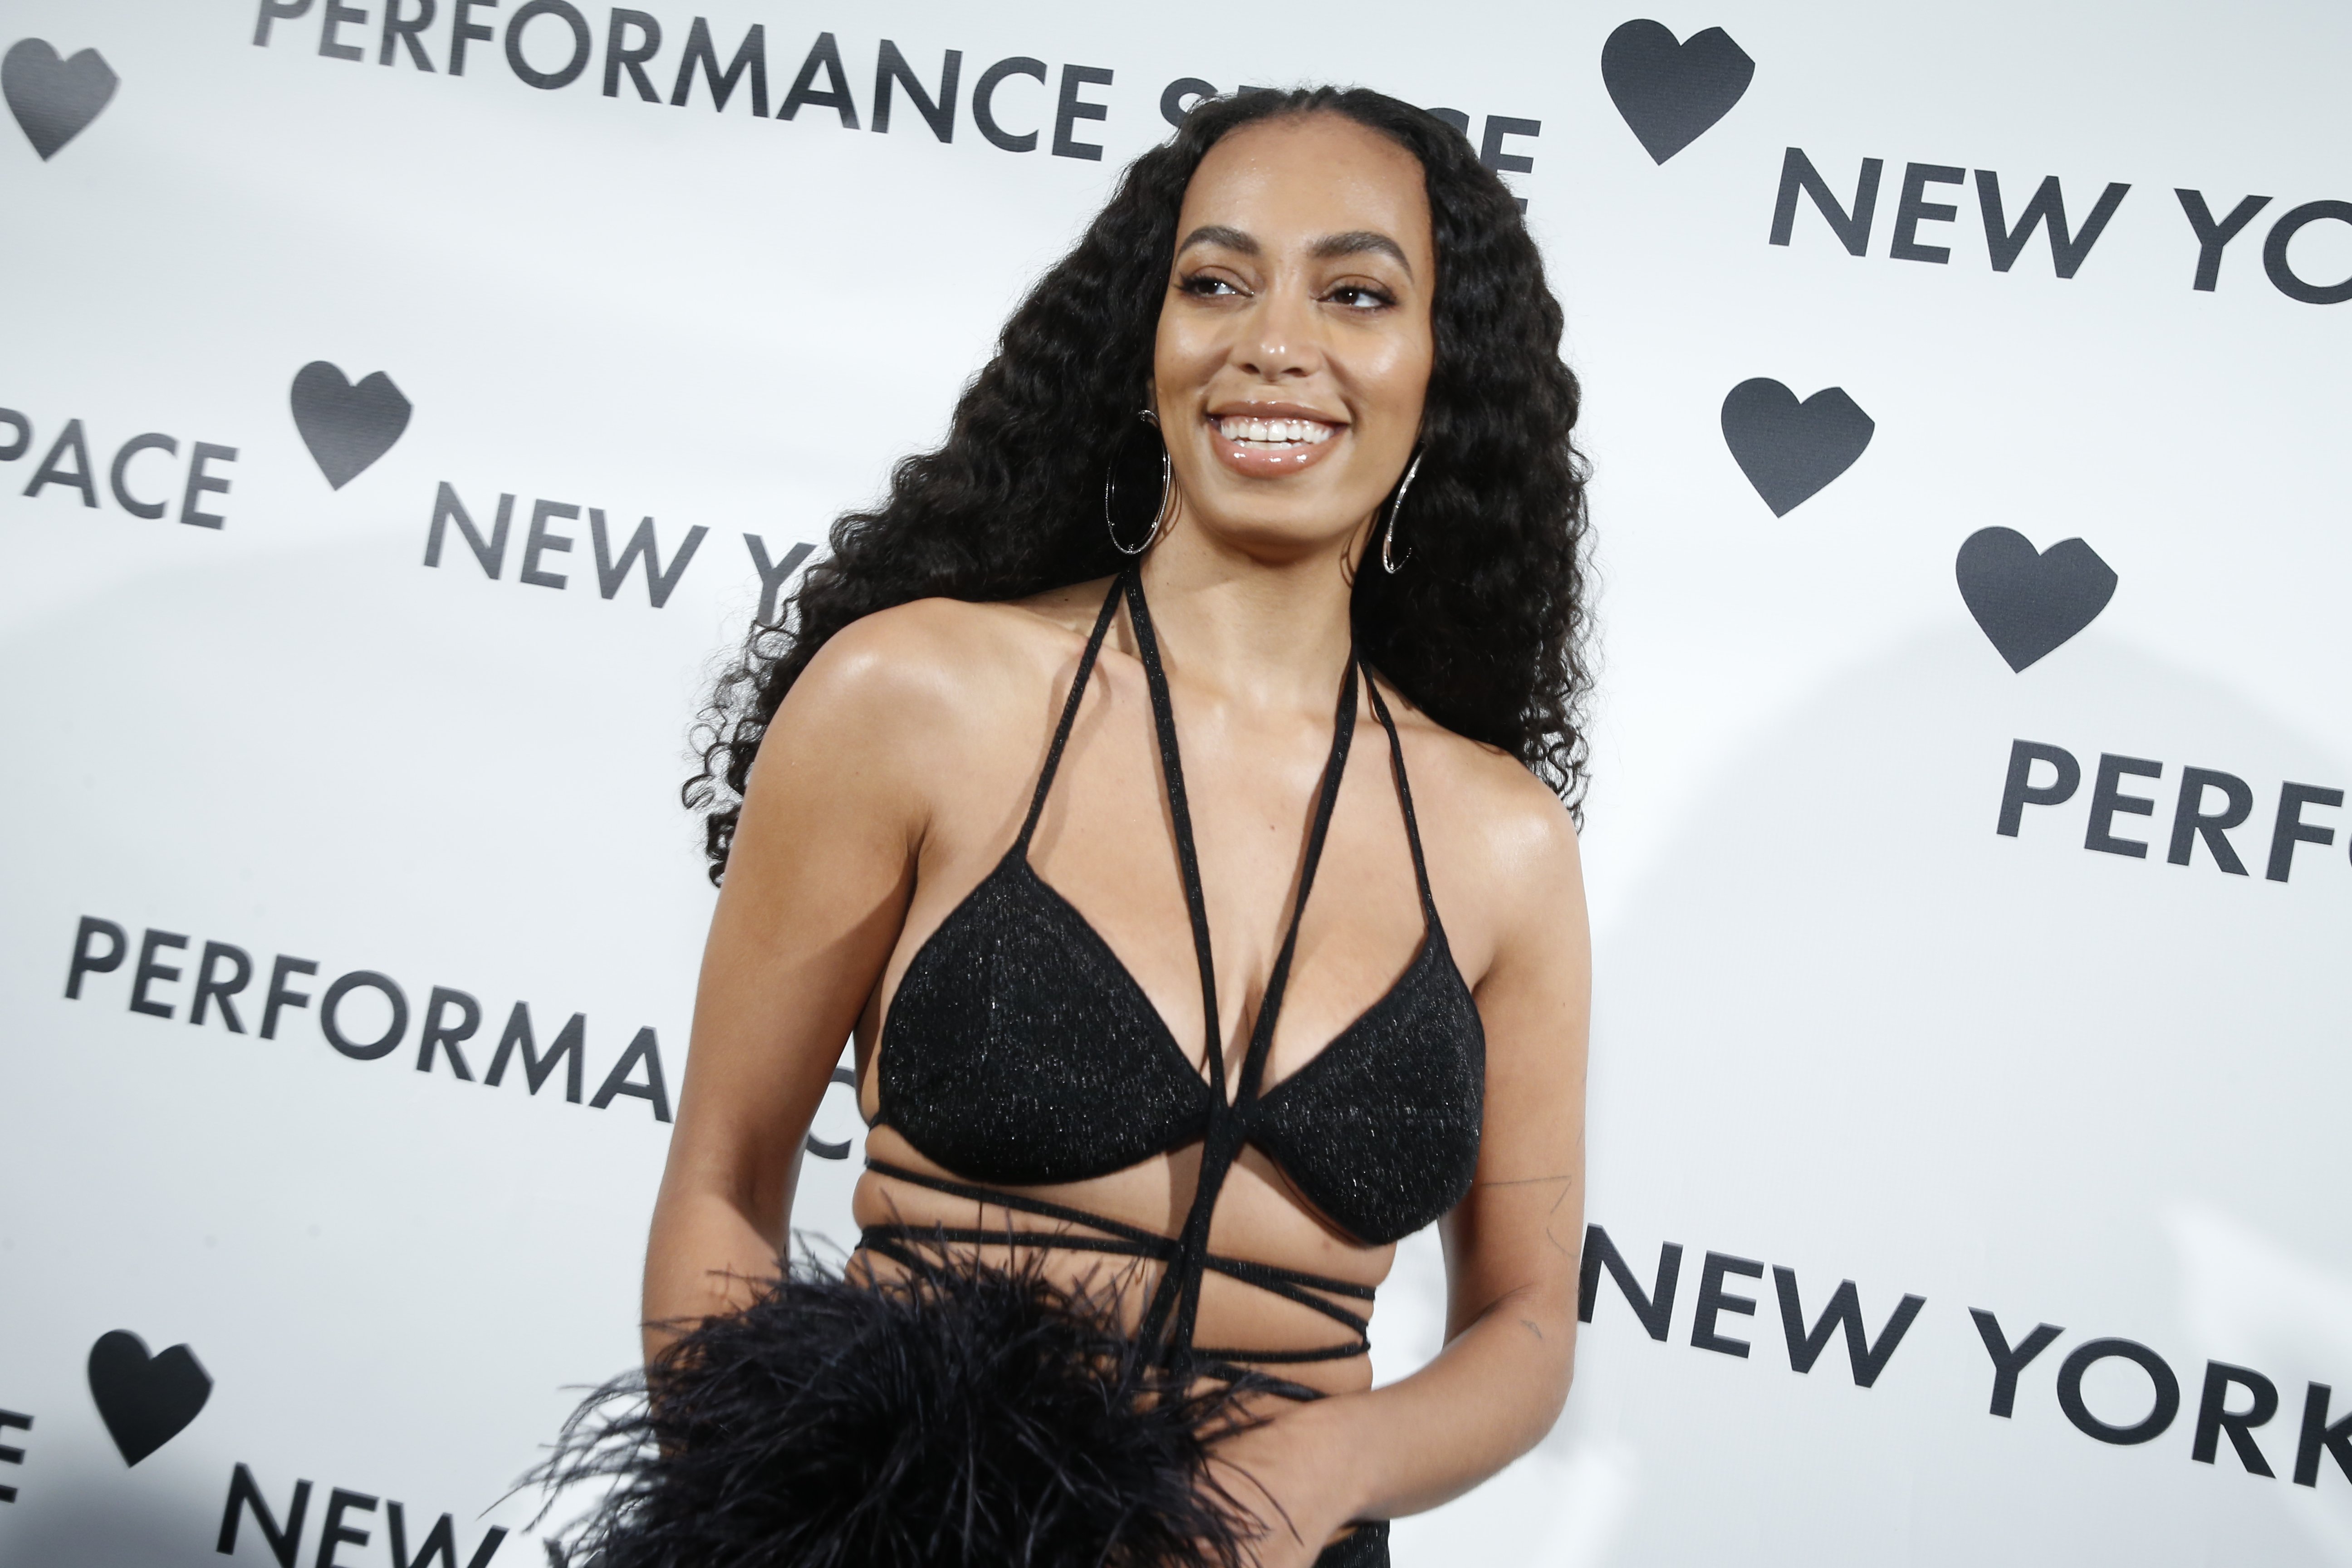 Solange Knowles at New York's Spring Gala on May 04, 2019 in New York City. |Source: Getty Images